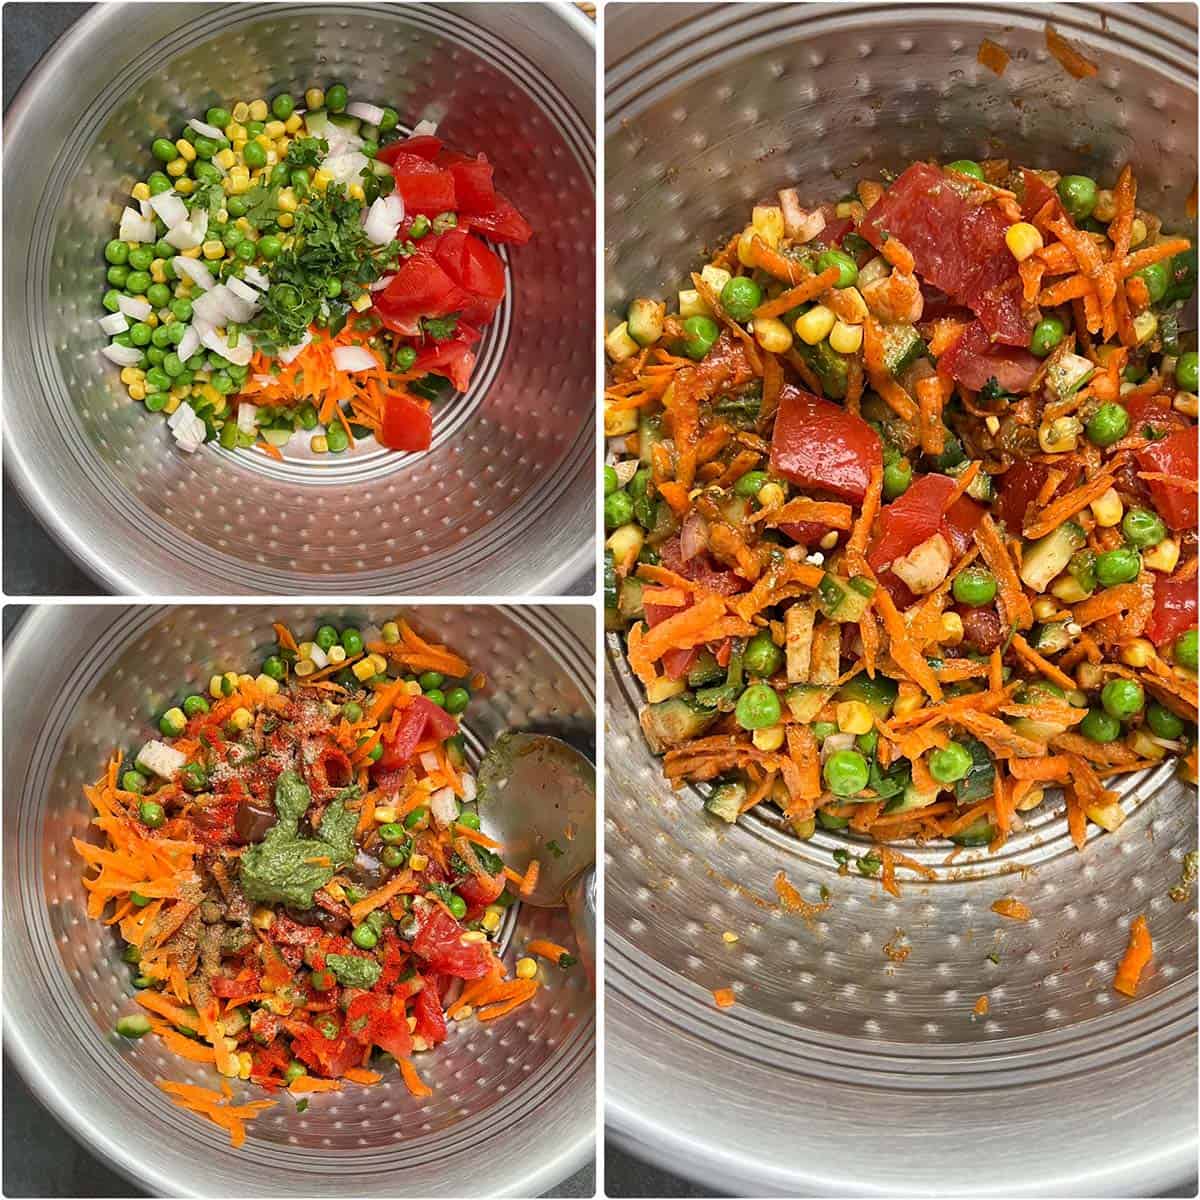 3 panel photo showing the mixing for vegetables in a steel bowl.